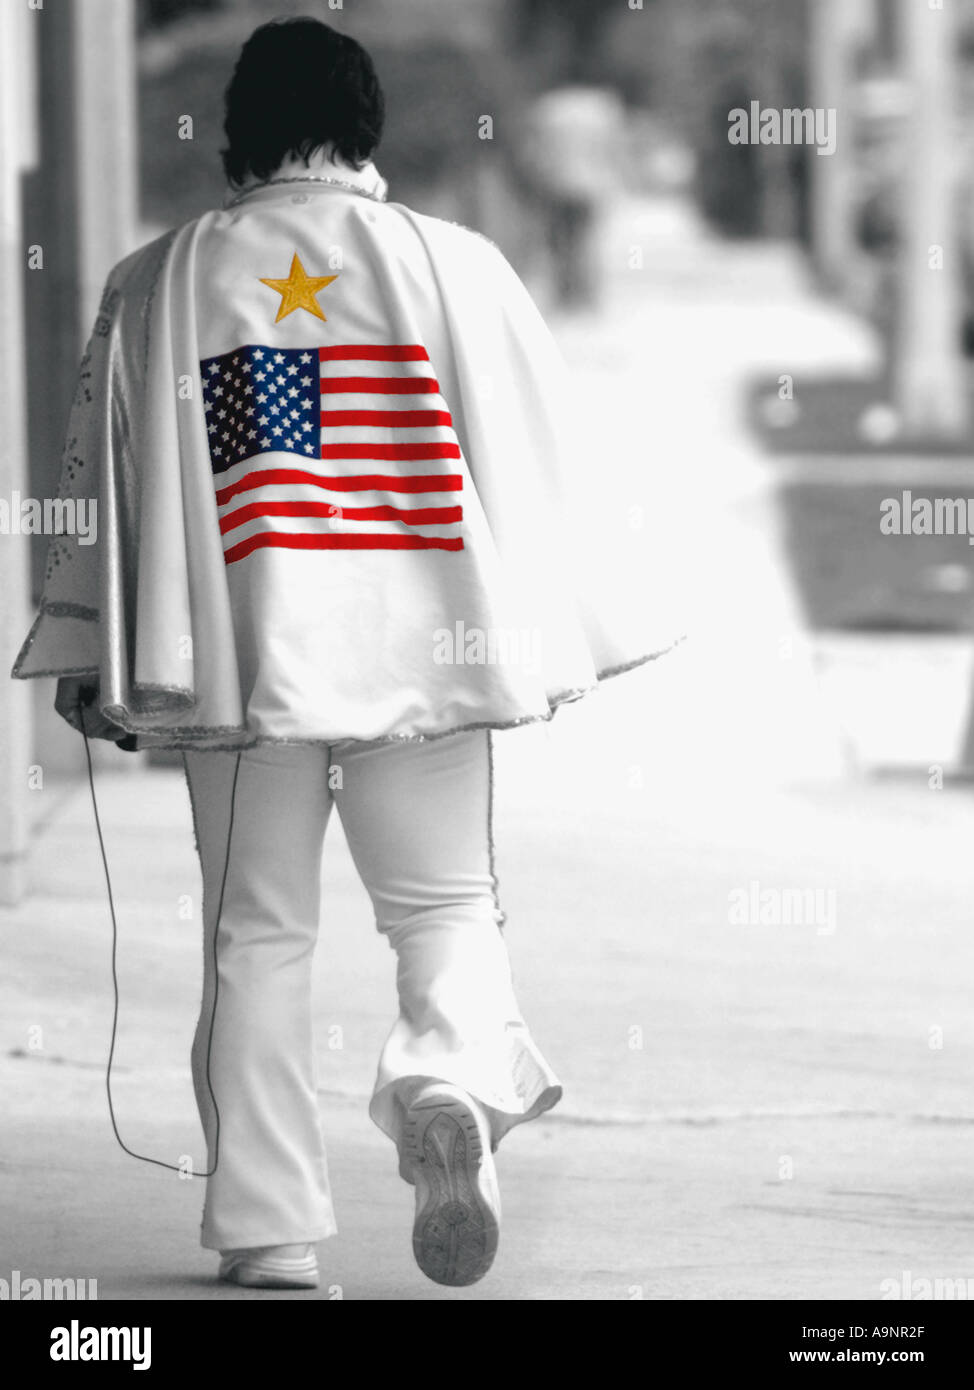 Rear view of Elvis Presley lookalike off Sunset Boulevard, Los Angeles - Black and white with Spot colour stars and stripes - Stock Photo